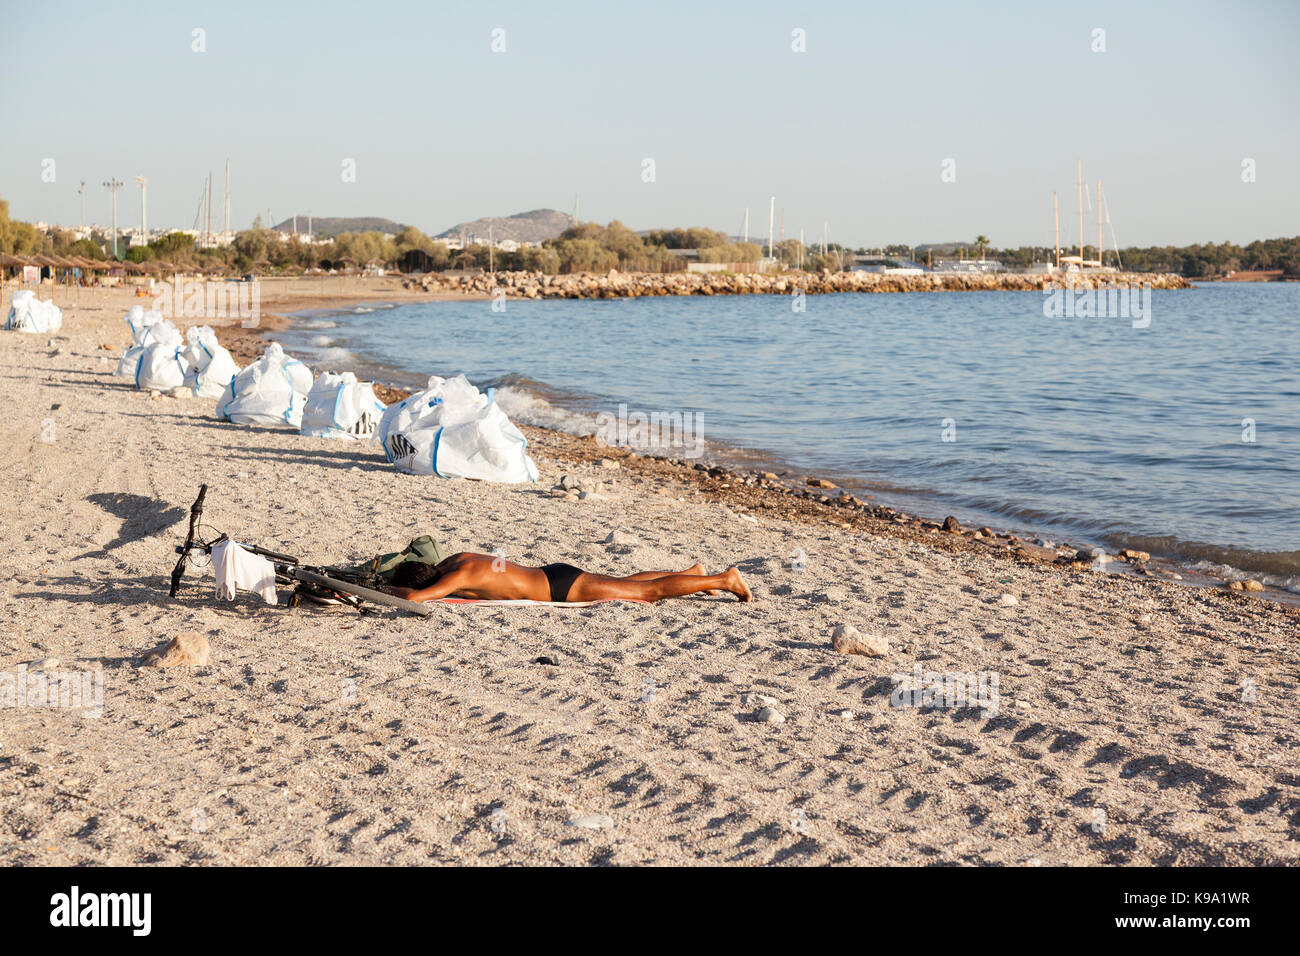 A man is sunbathing in the beach of Glyfada (Athens, Greece) which is polluted by an oil spill. The white bags next to the man are full of crude oil. Stock Photo